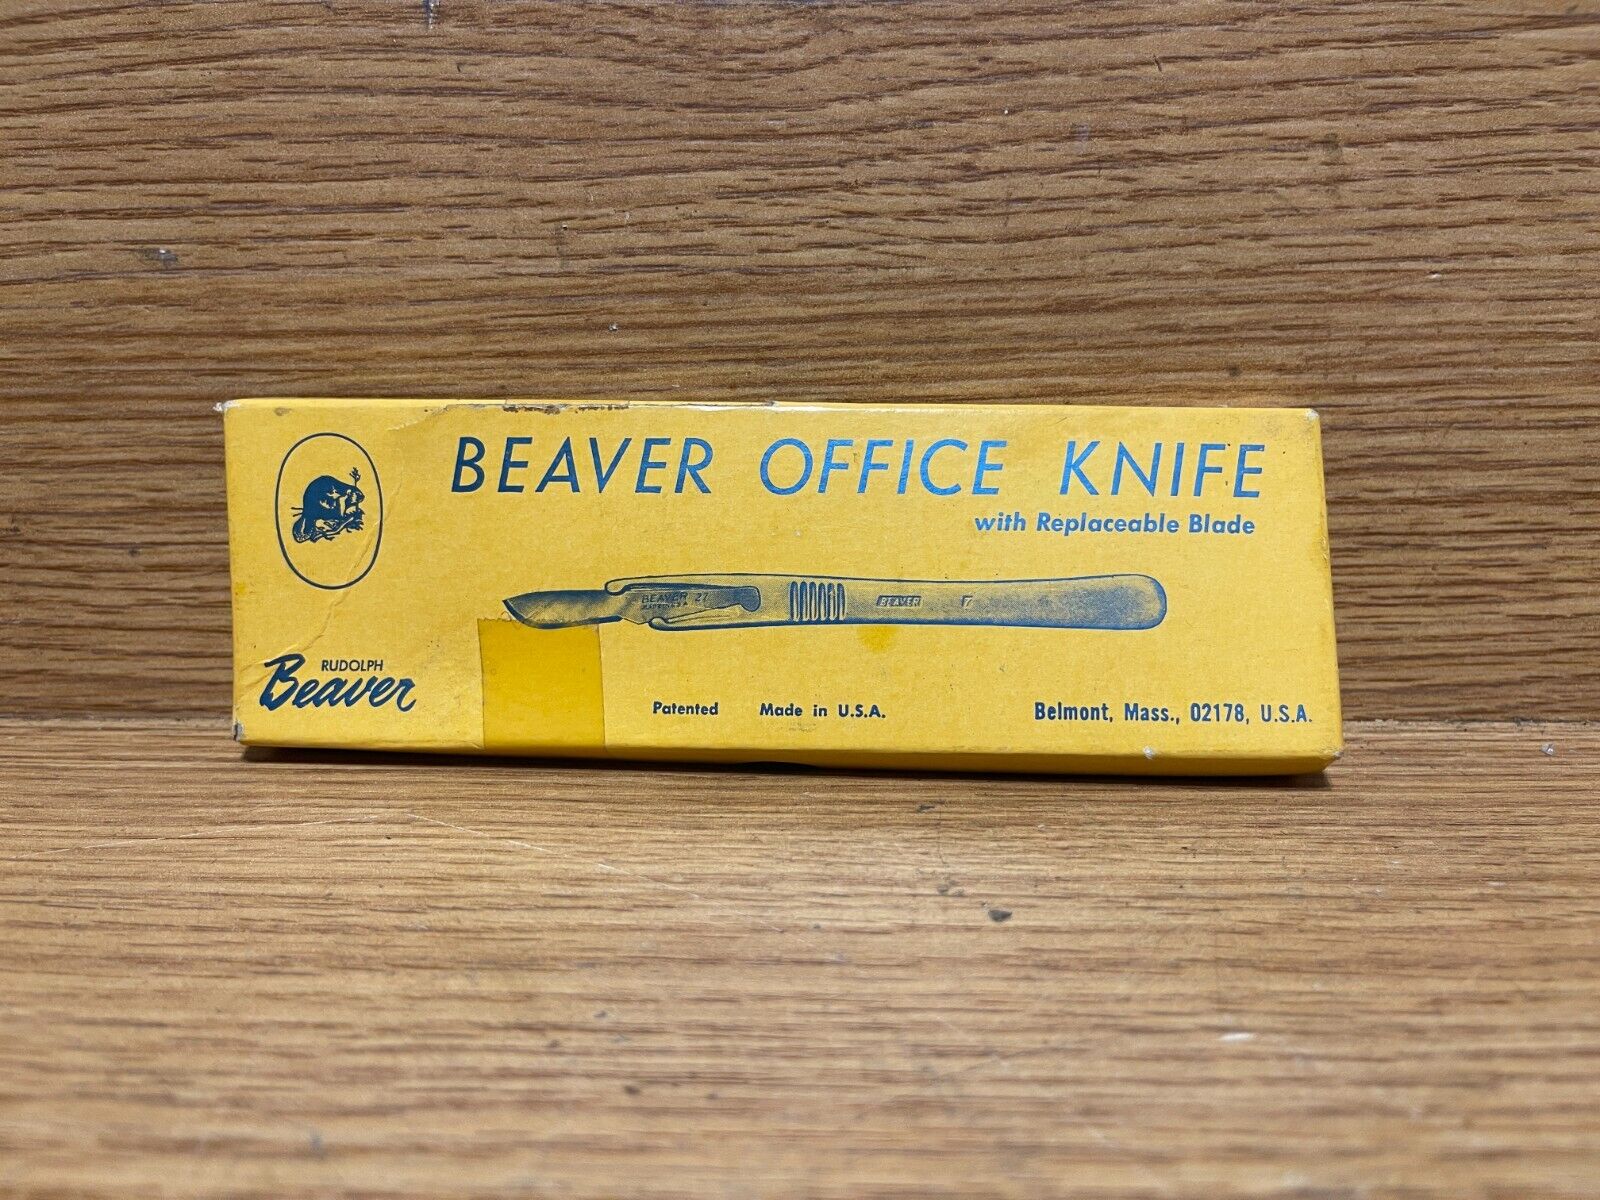 Vintage Beaver Office Knife with Blade